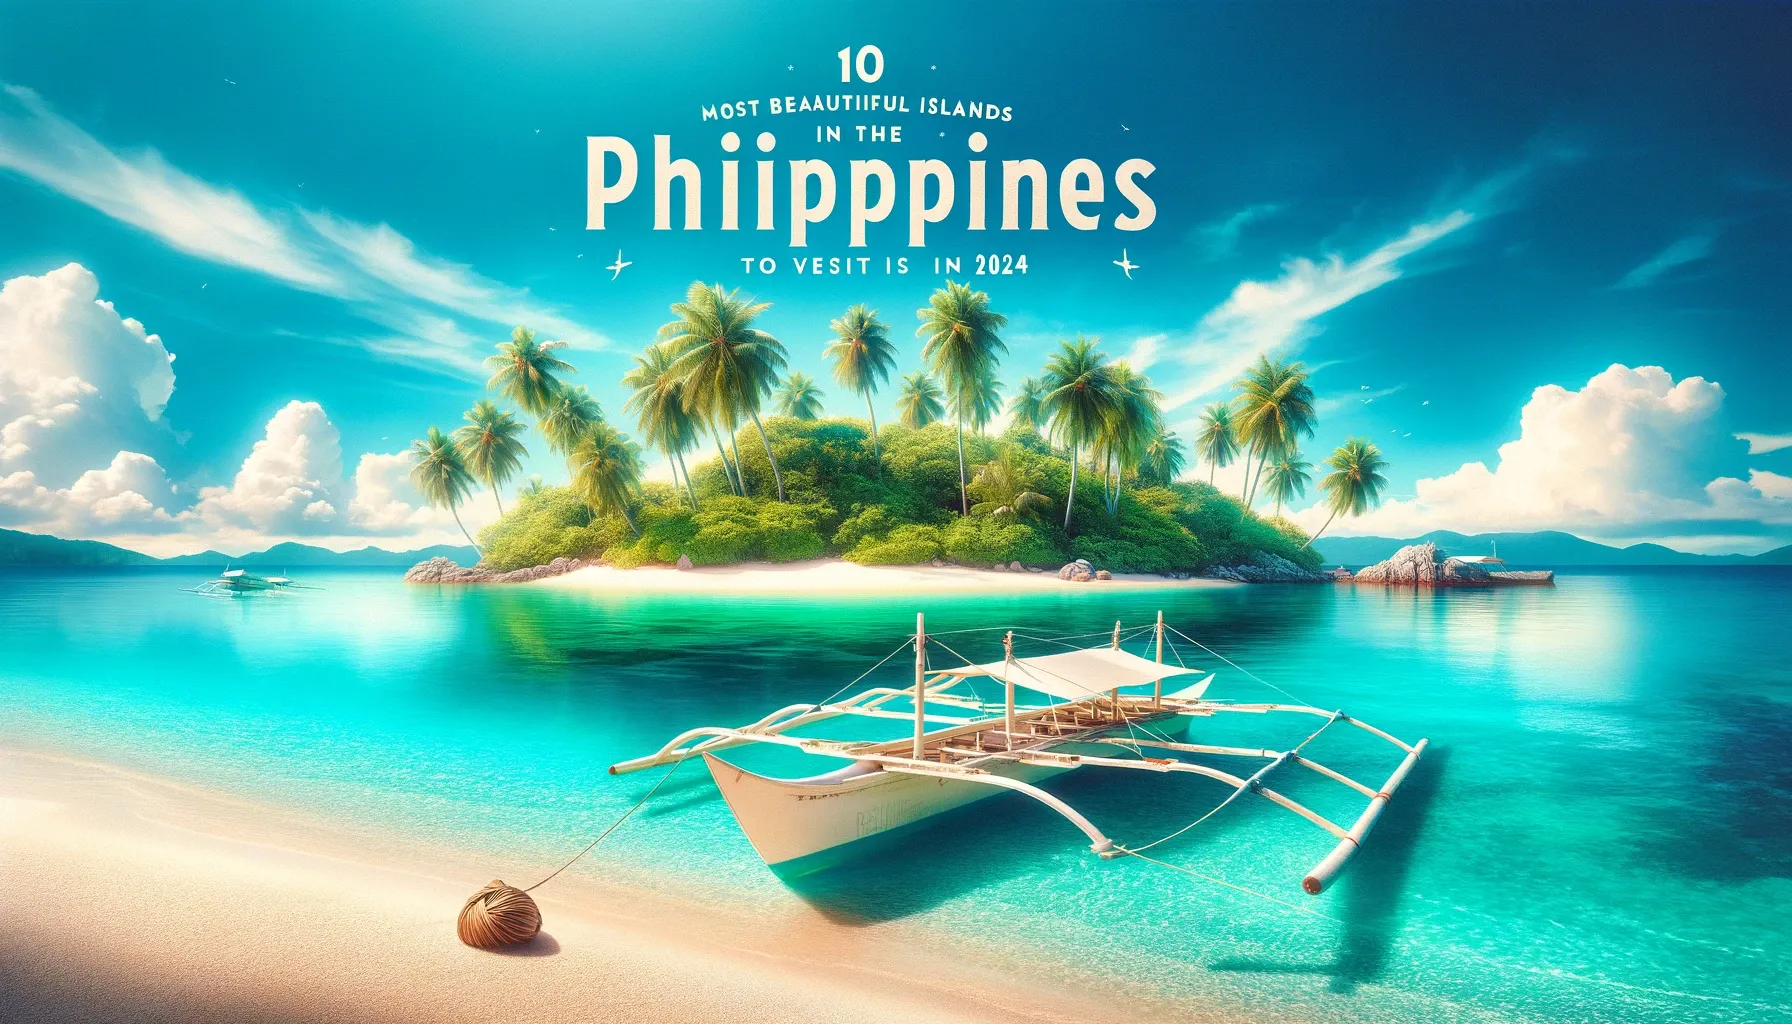 10 Most Beautiful Islands in the Philippines to Visit in 2024